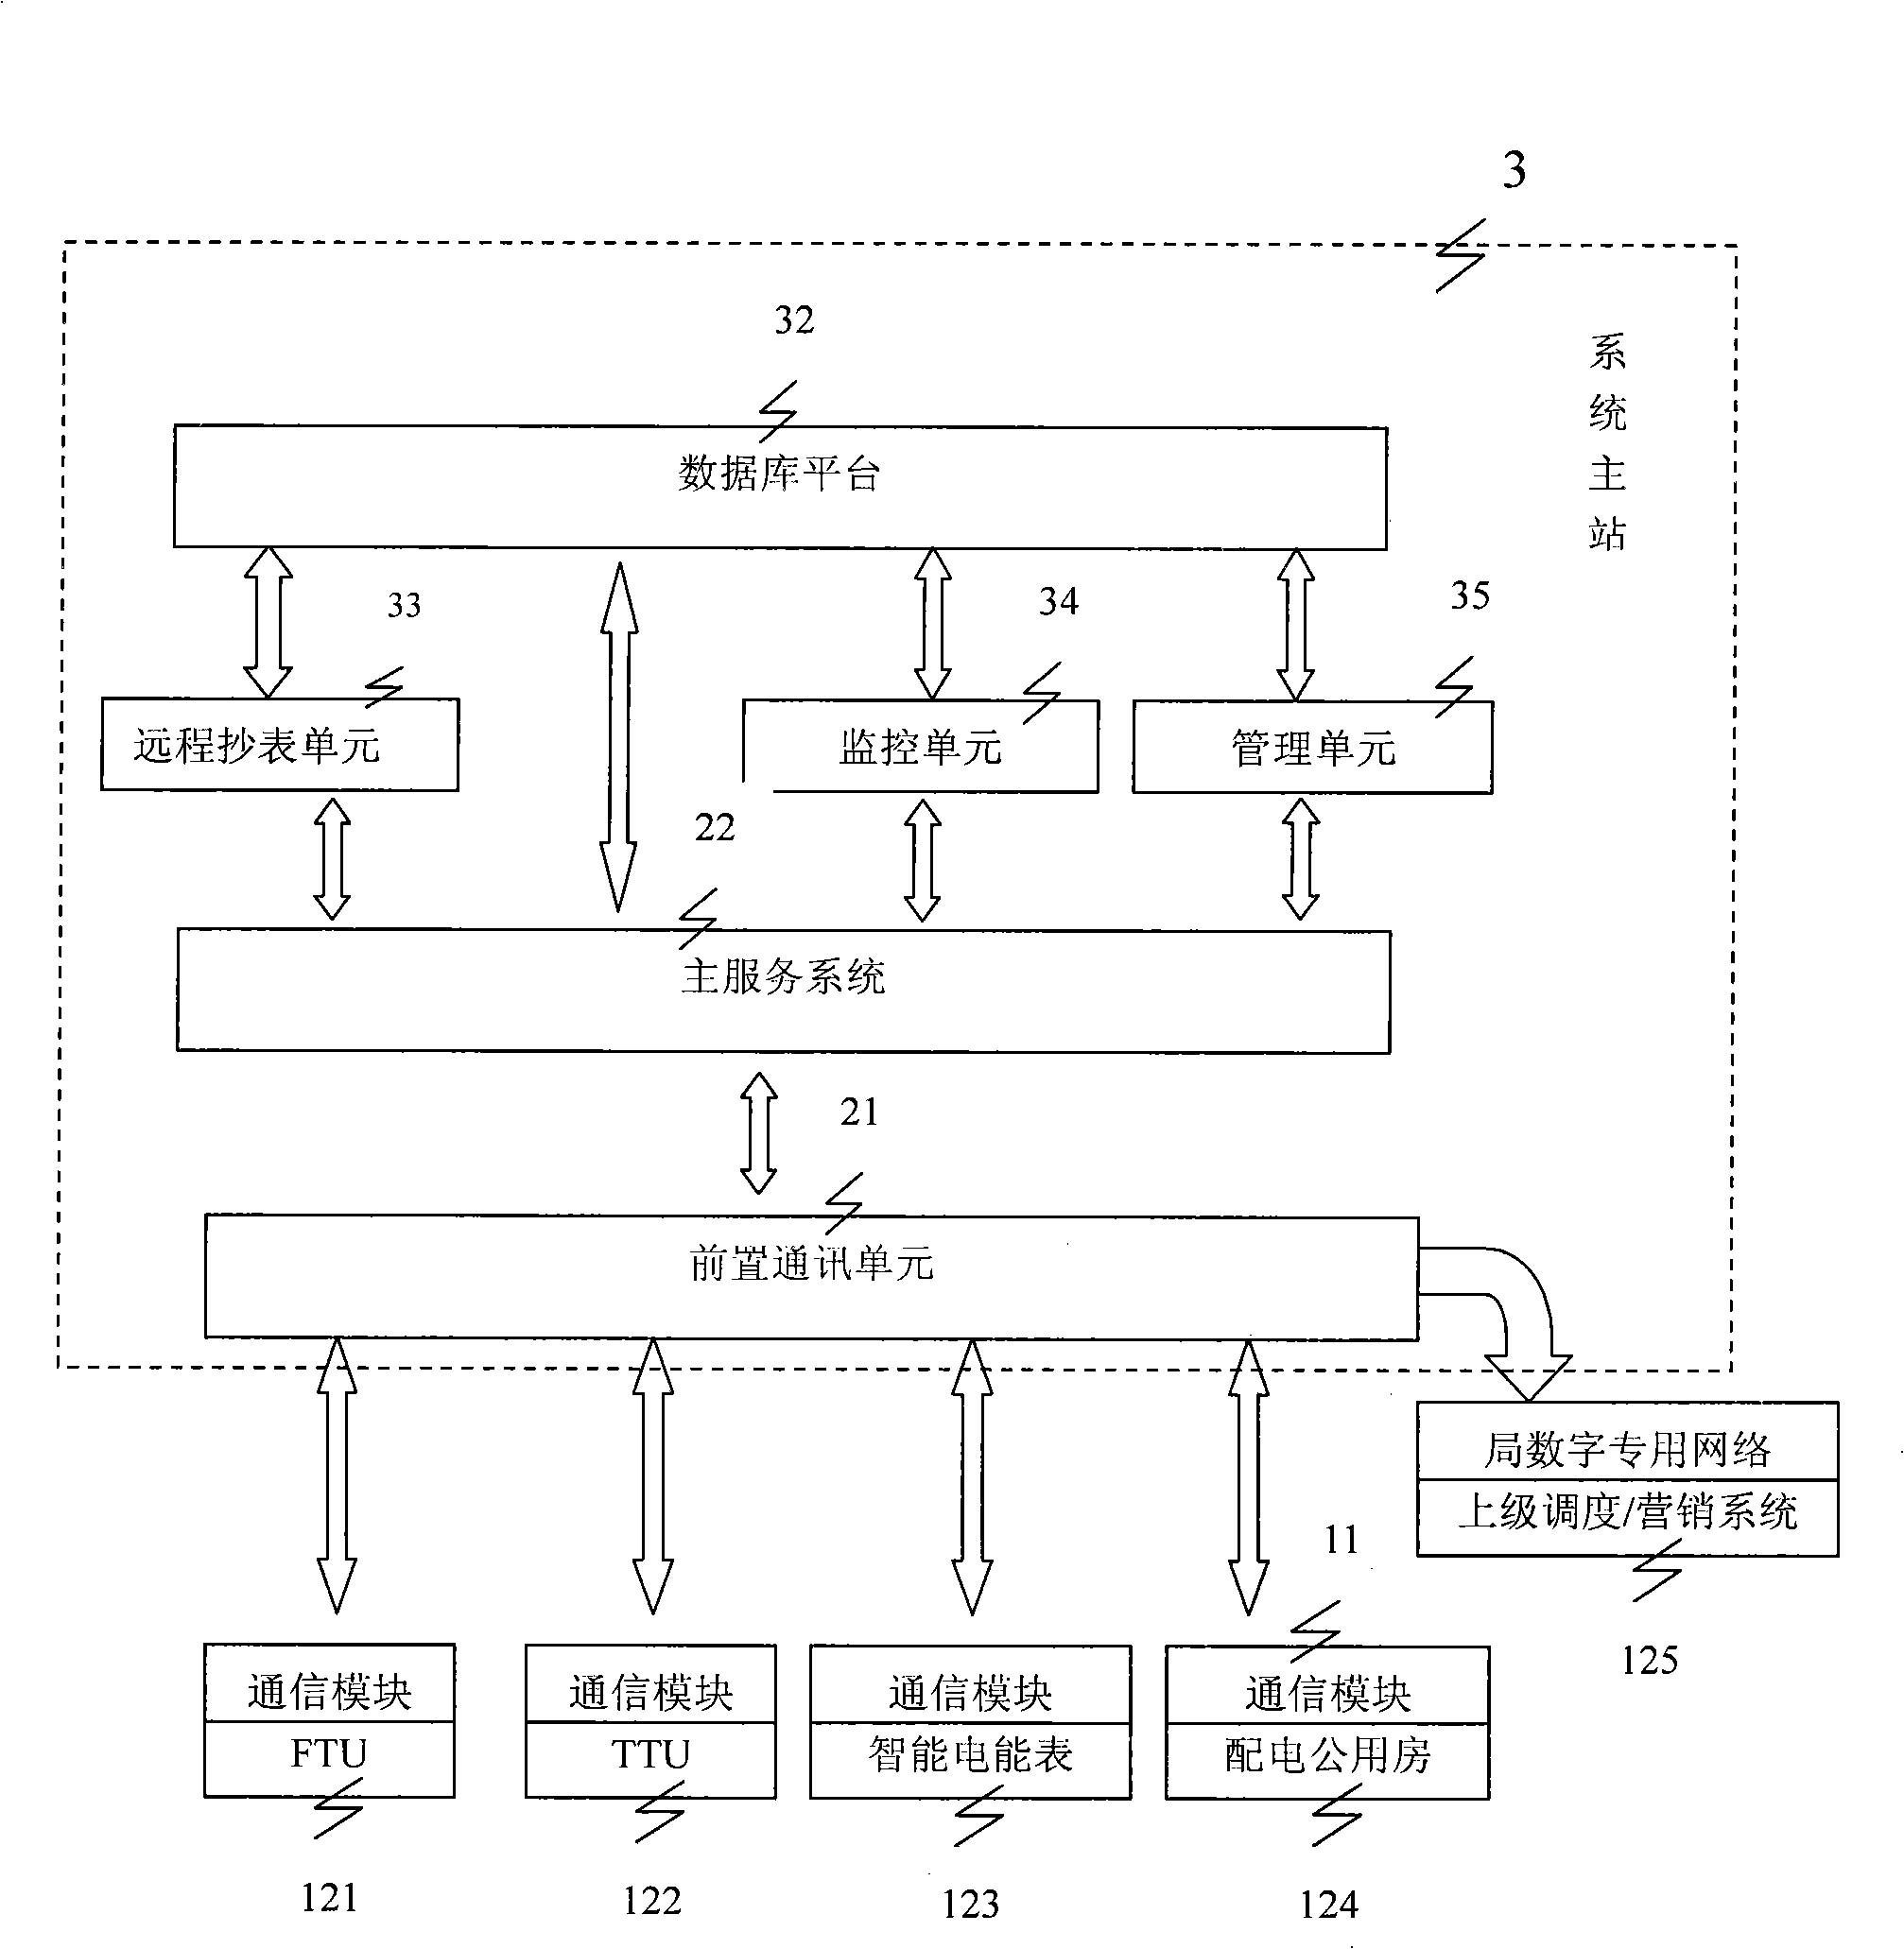 Integrated system for monitor, management and remotely meter-reading of power distribution network